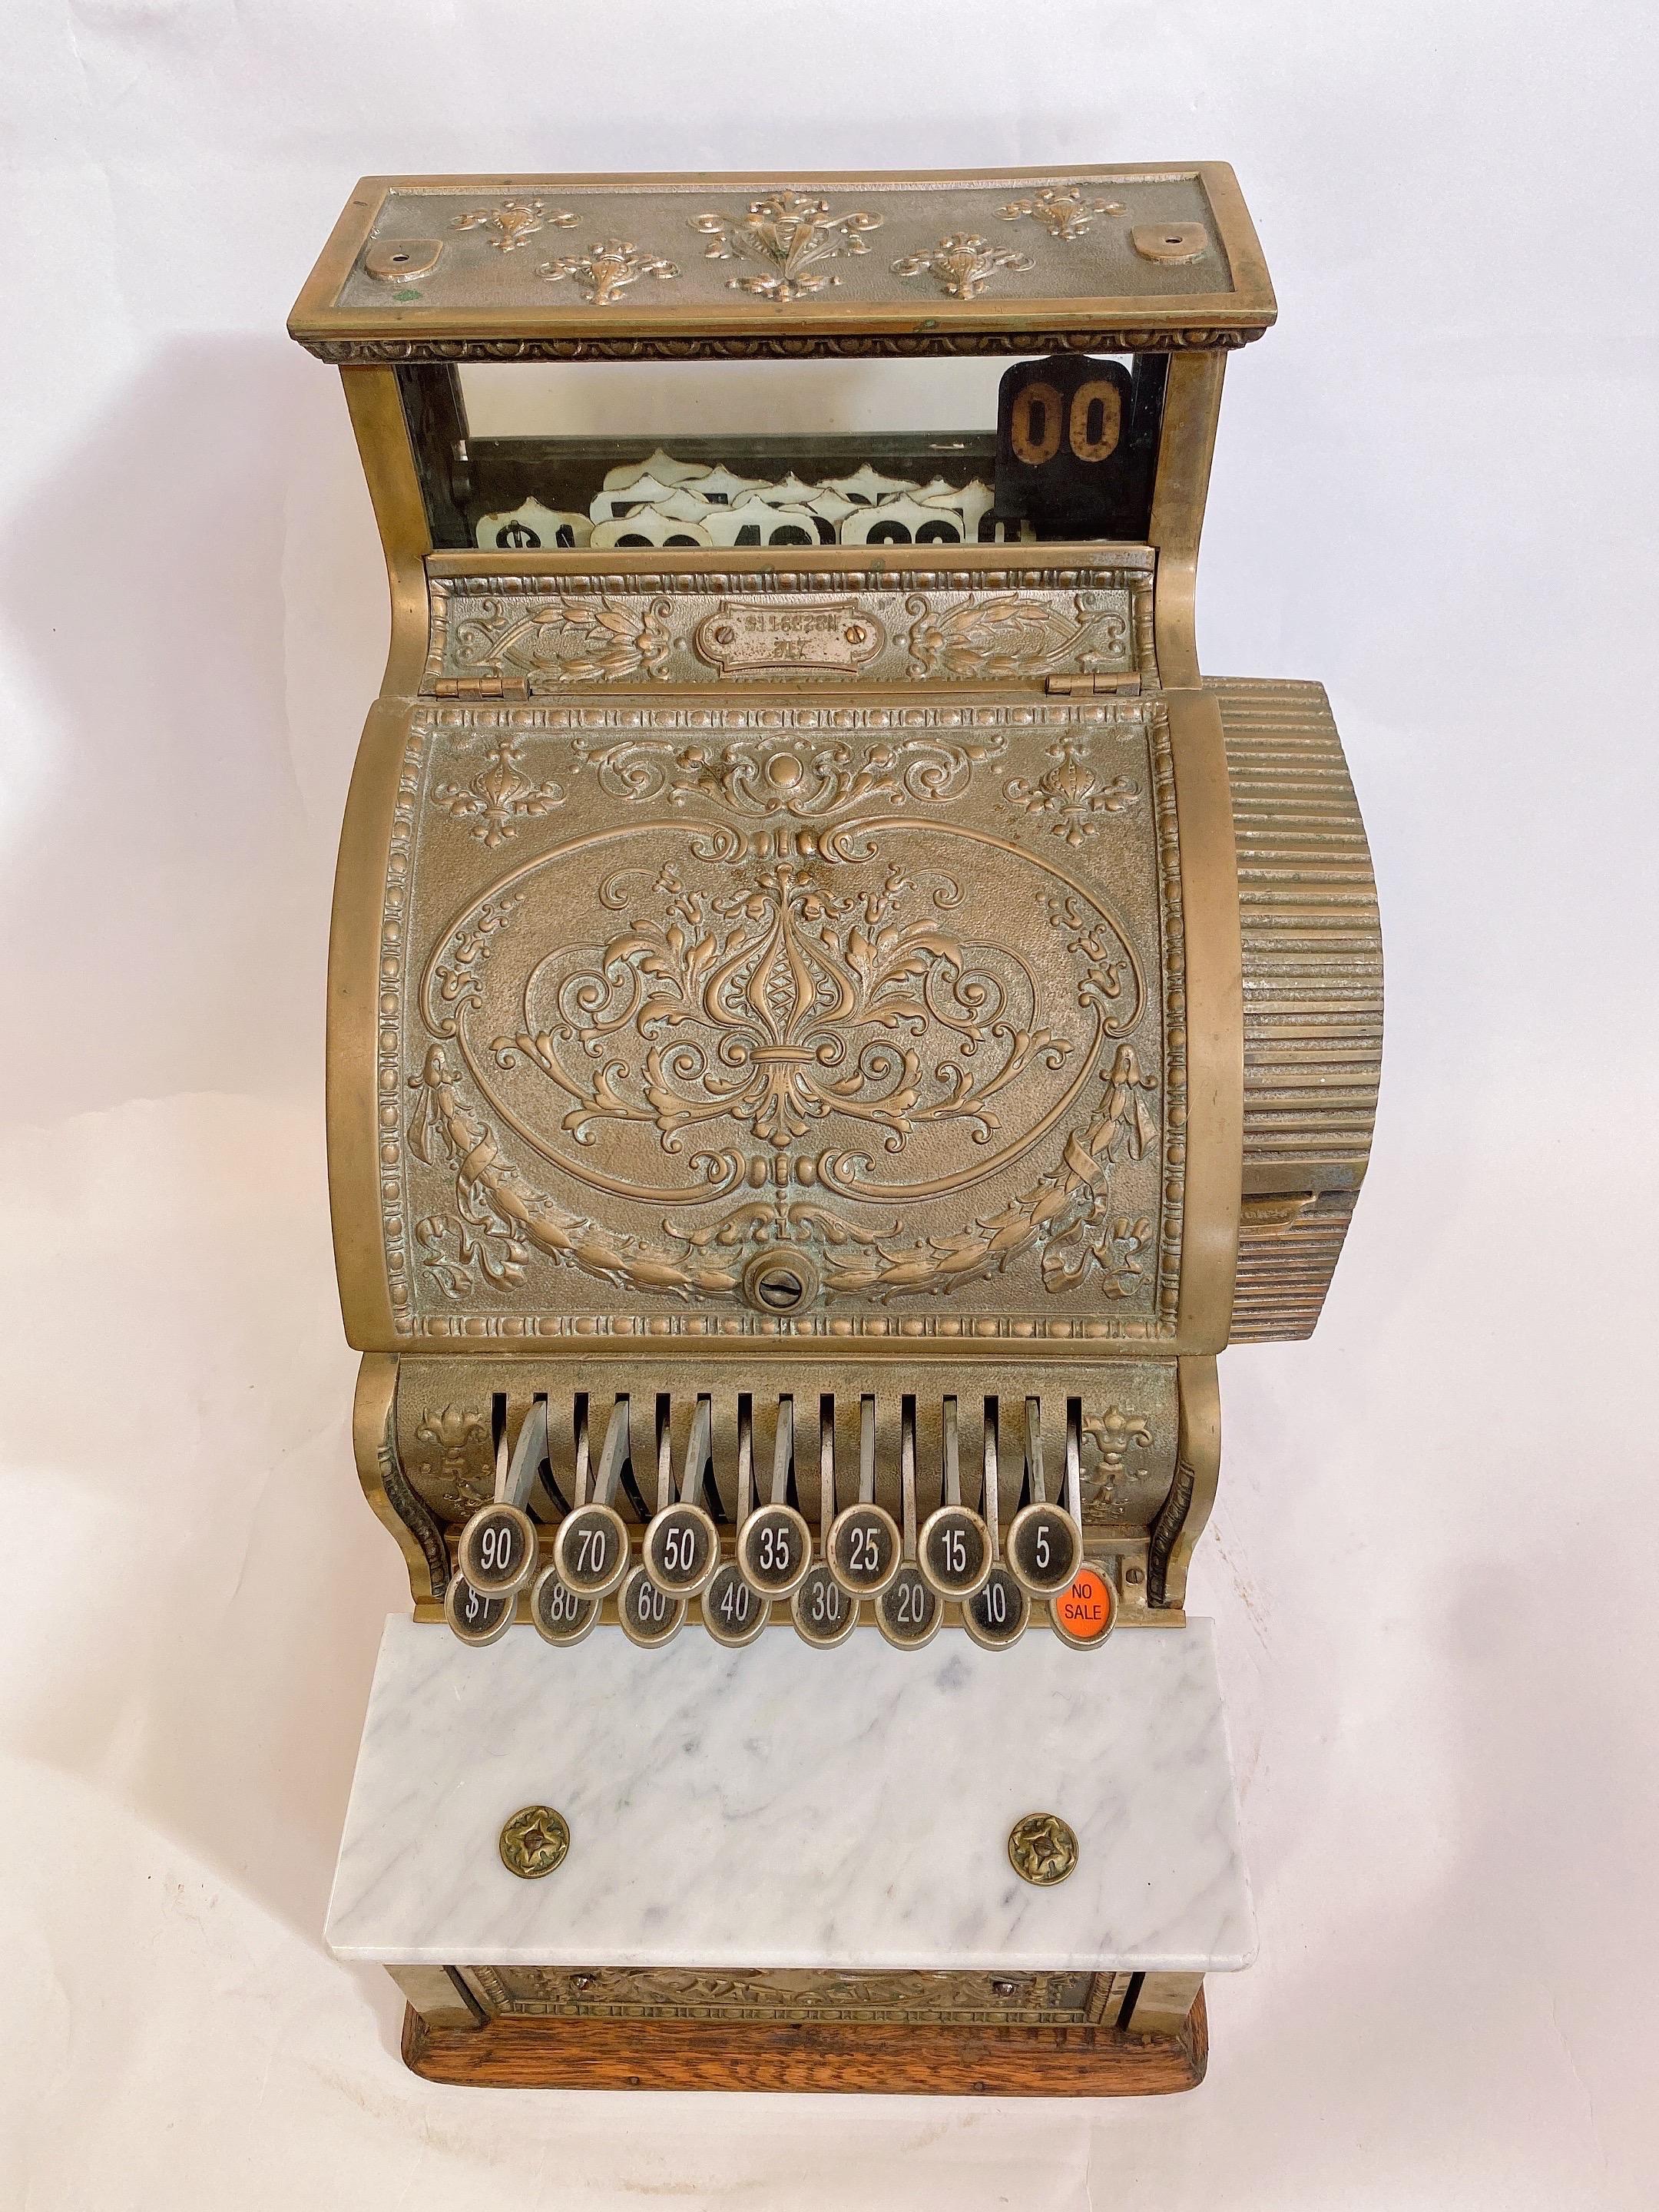 Early 1900s national brass cash register, used cash register by National Cash Register Co. It is still functioning well. This register is mounted on a solid wood desk, also in good condition. There is a small piece of white marble of the plate above